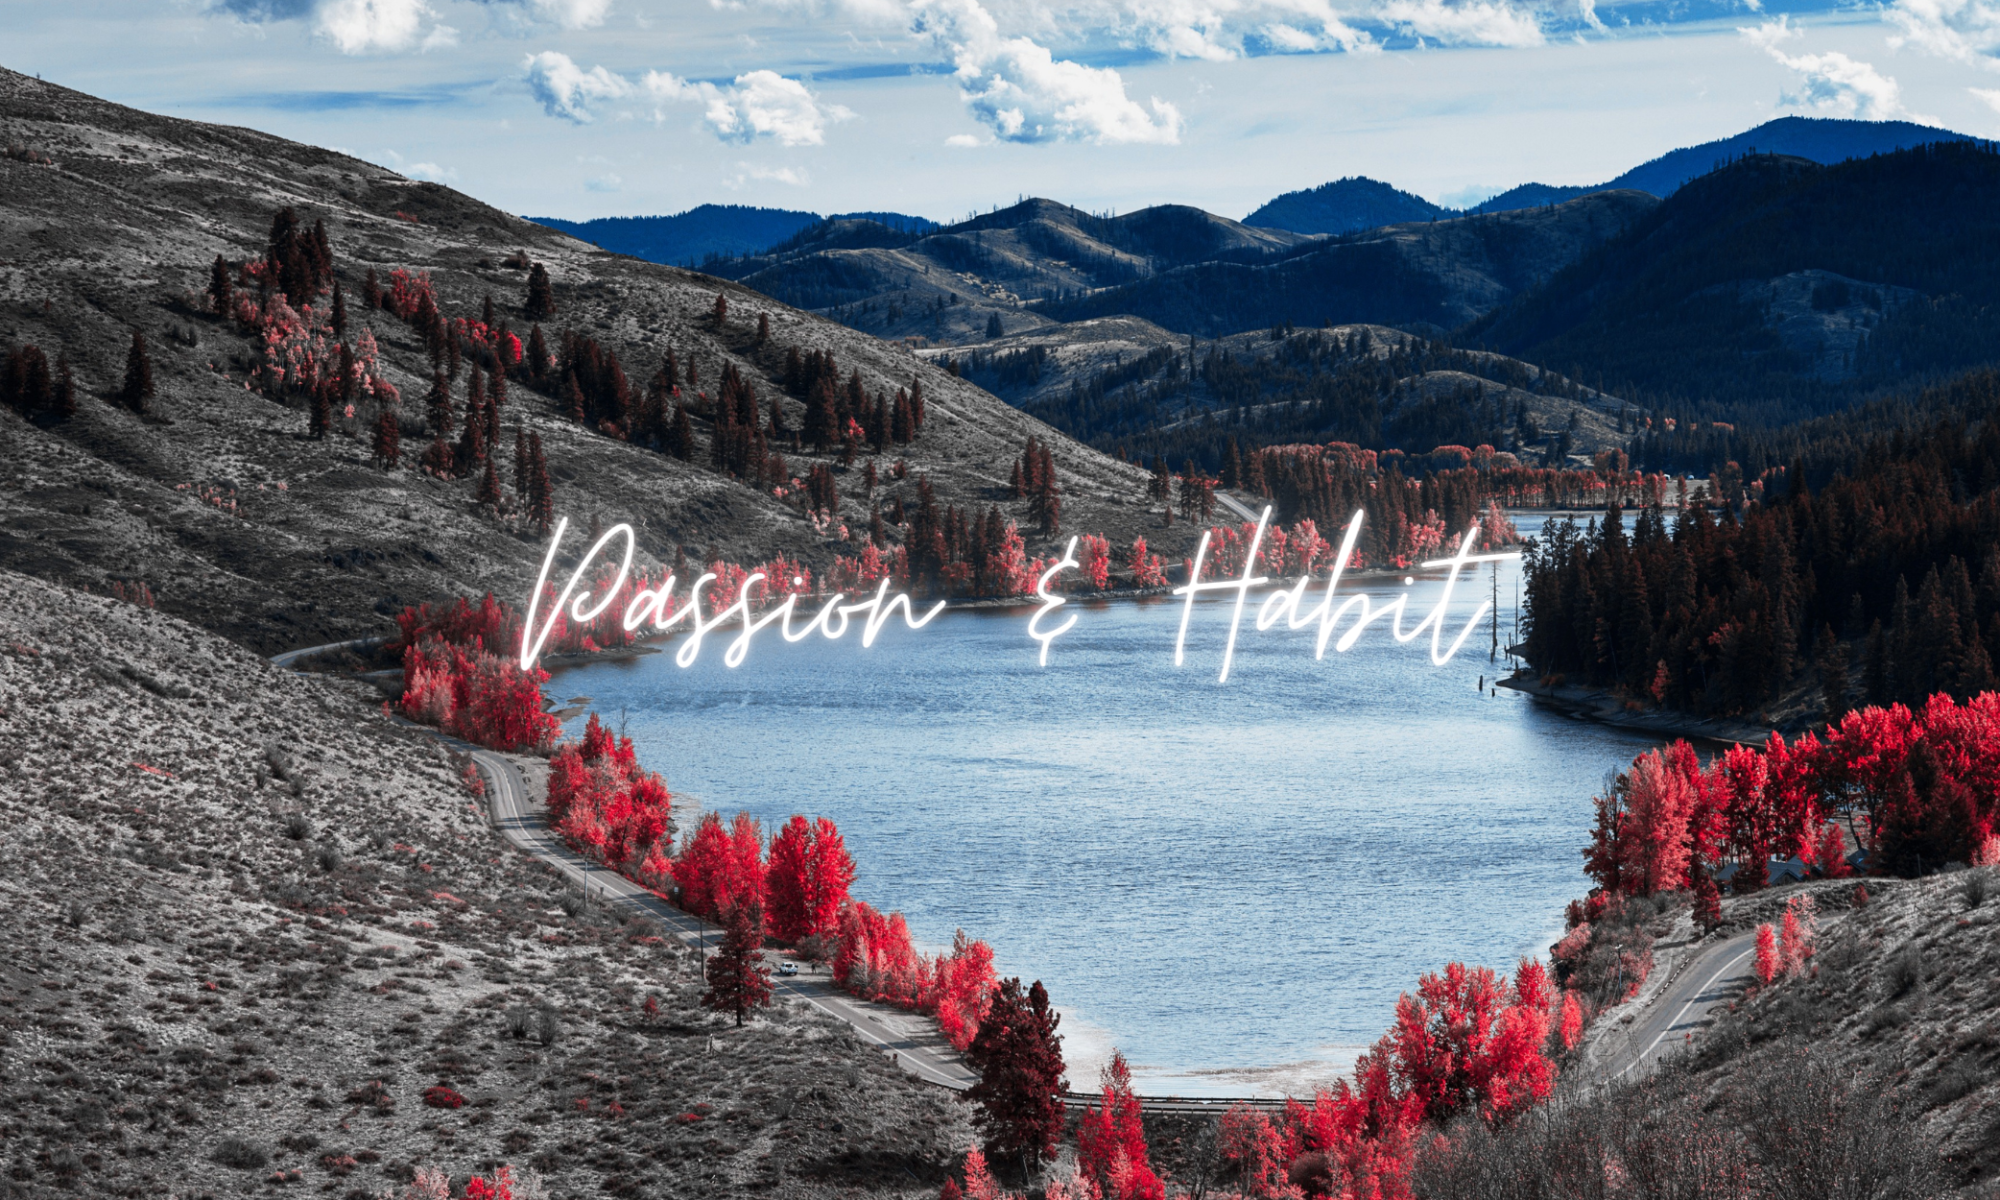 Mountain landscape with a small lake in the middle, bordered by a road and beautiful trees. Text overlay is "Passion & Habit"